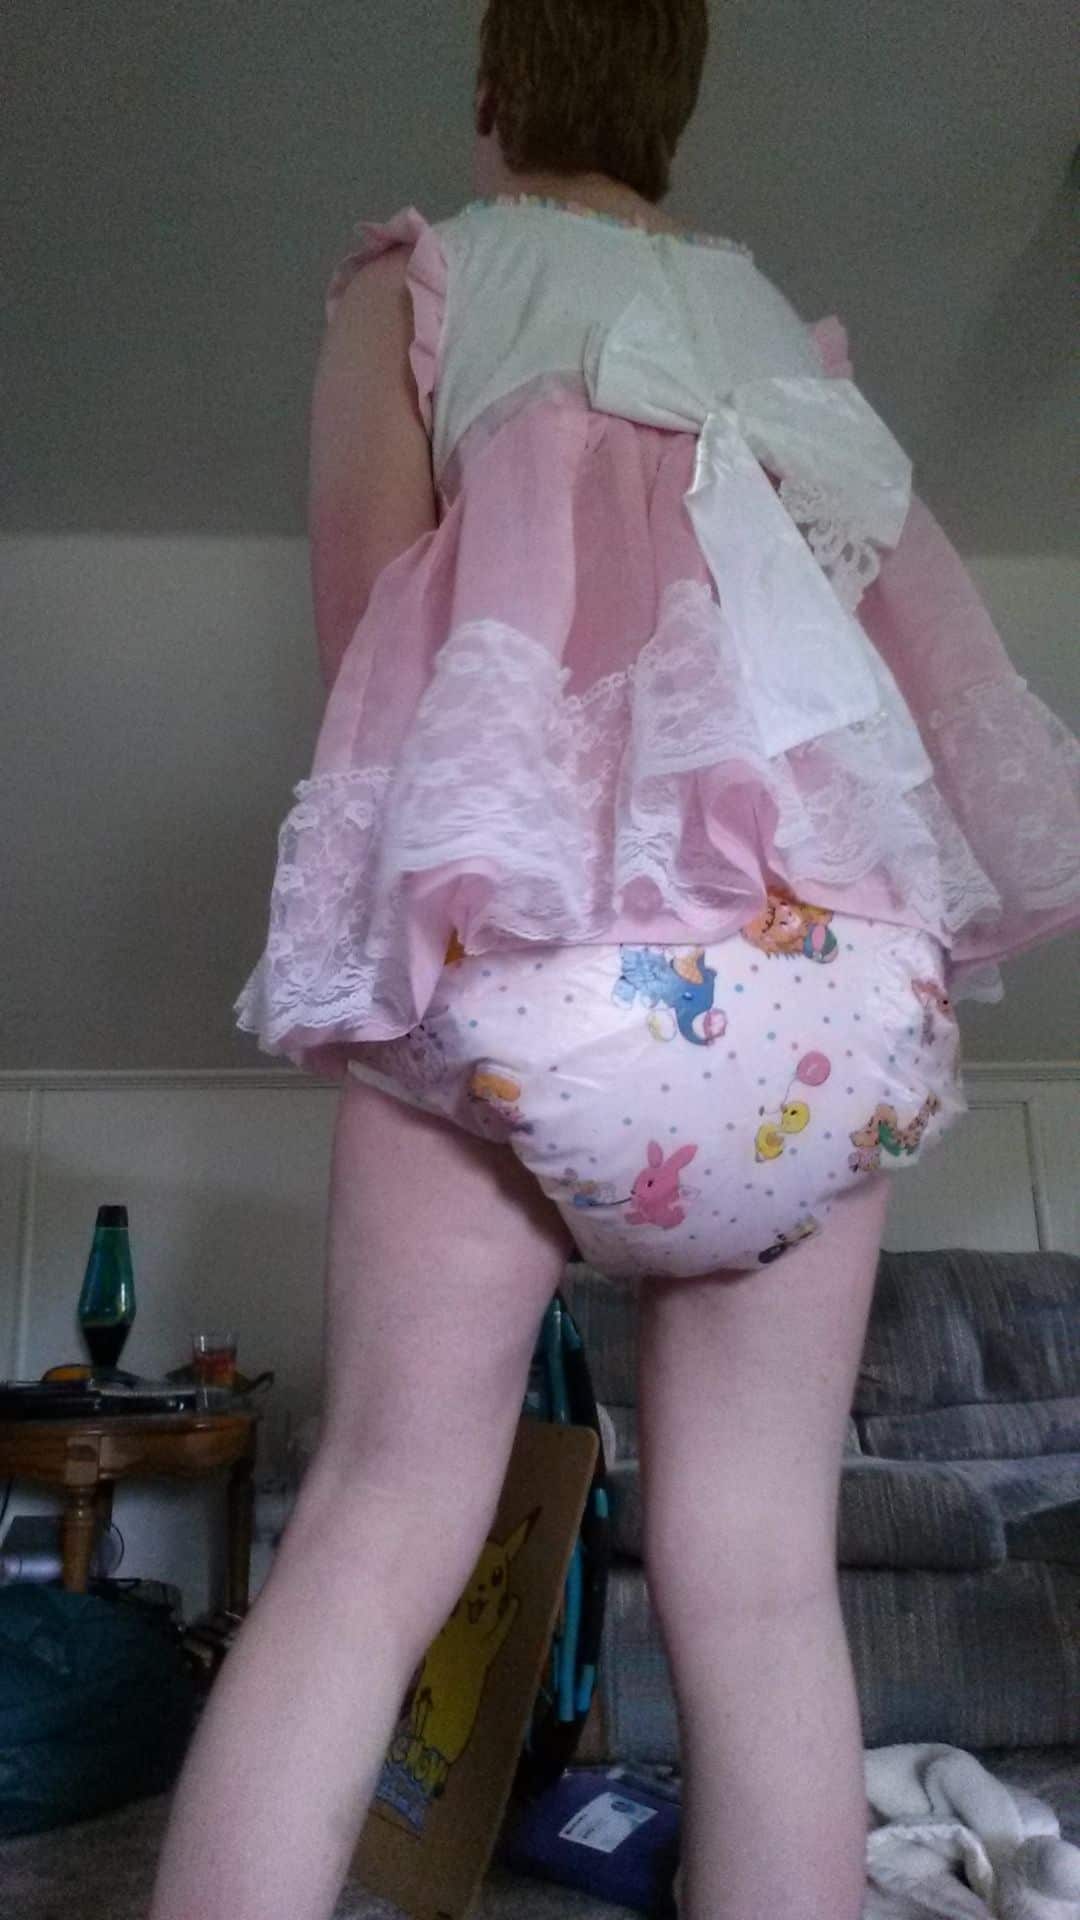 For the photo session, a Diaper Sissy is positioned on the ground while standing.